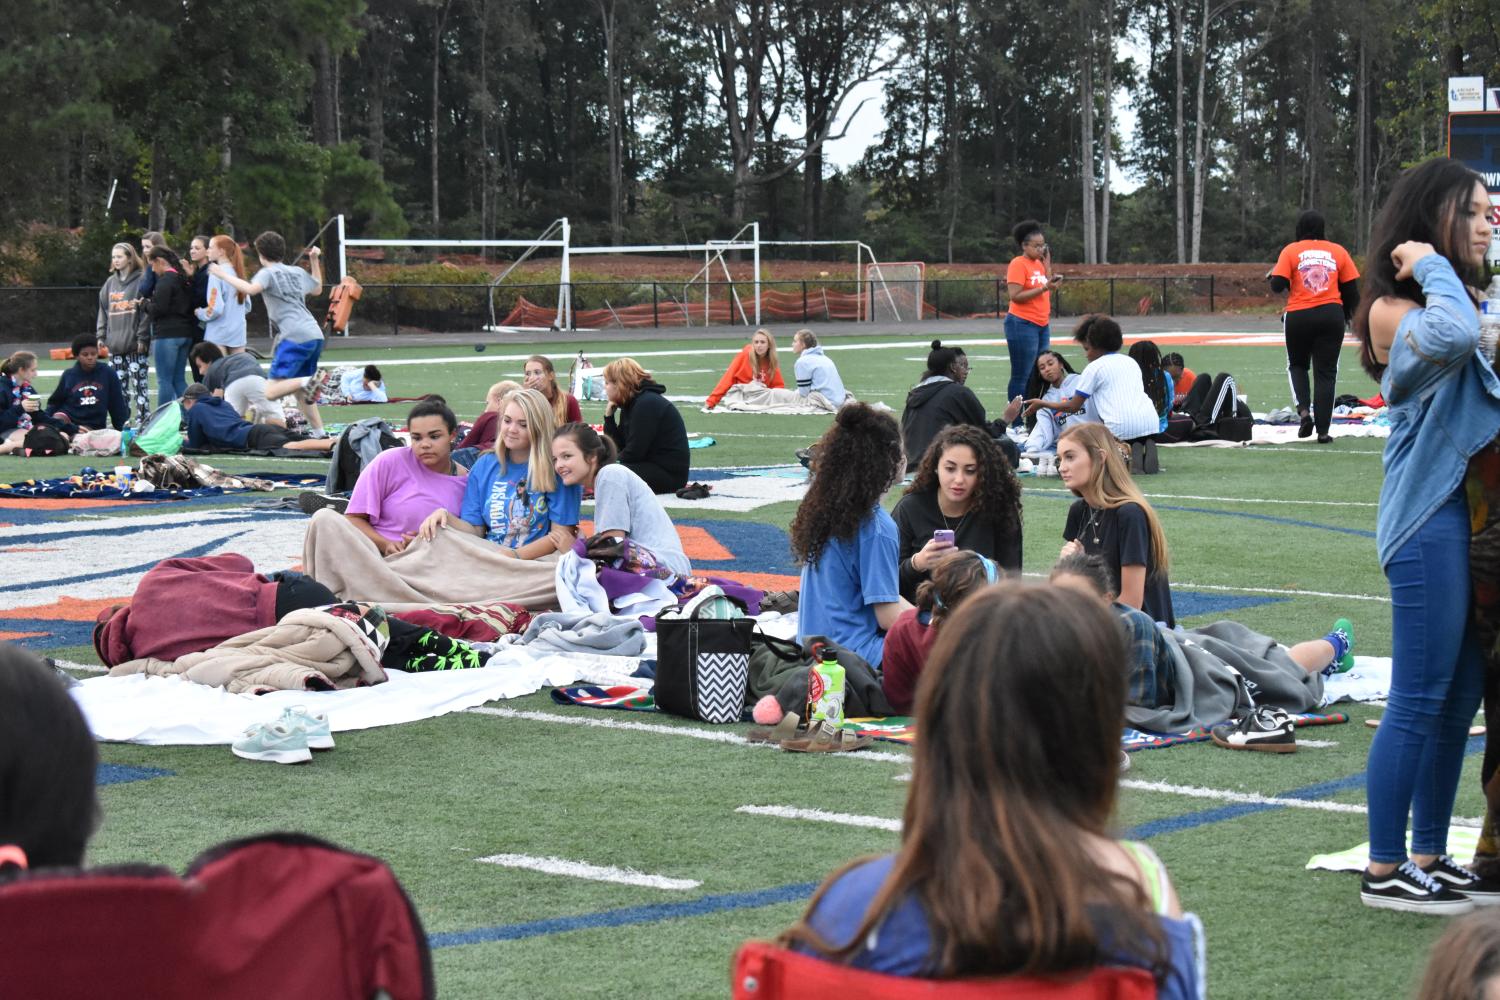 From the Wizard of Oz film that played last year at Screen on the Green to this year’s Disney original, College Road Trip, students of all grade levels filled the football field to relax with their friends and watch a great film. “I thought it was a really cool idea and was fun if you’re hanging out with the right people,” freshman Tori Lee said.
